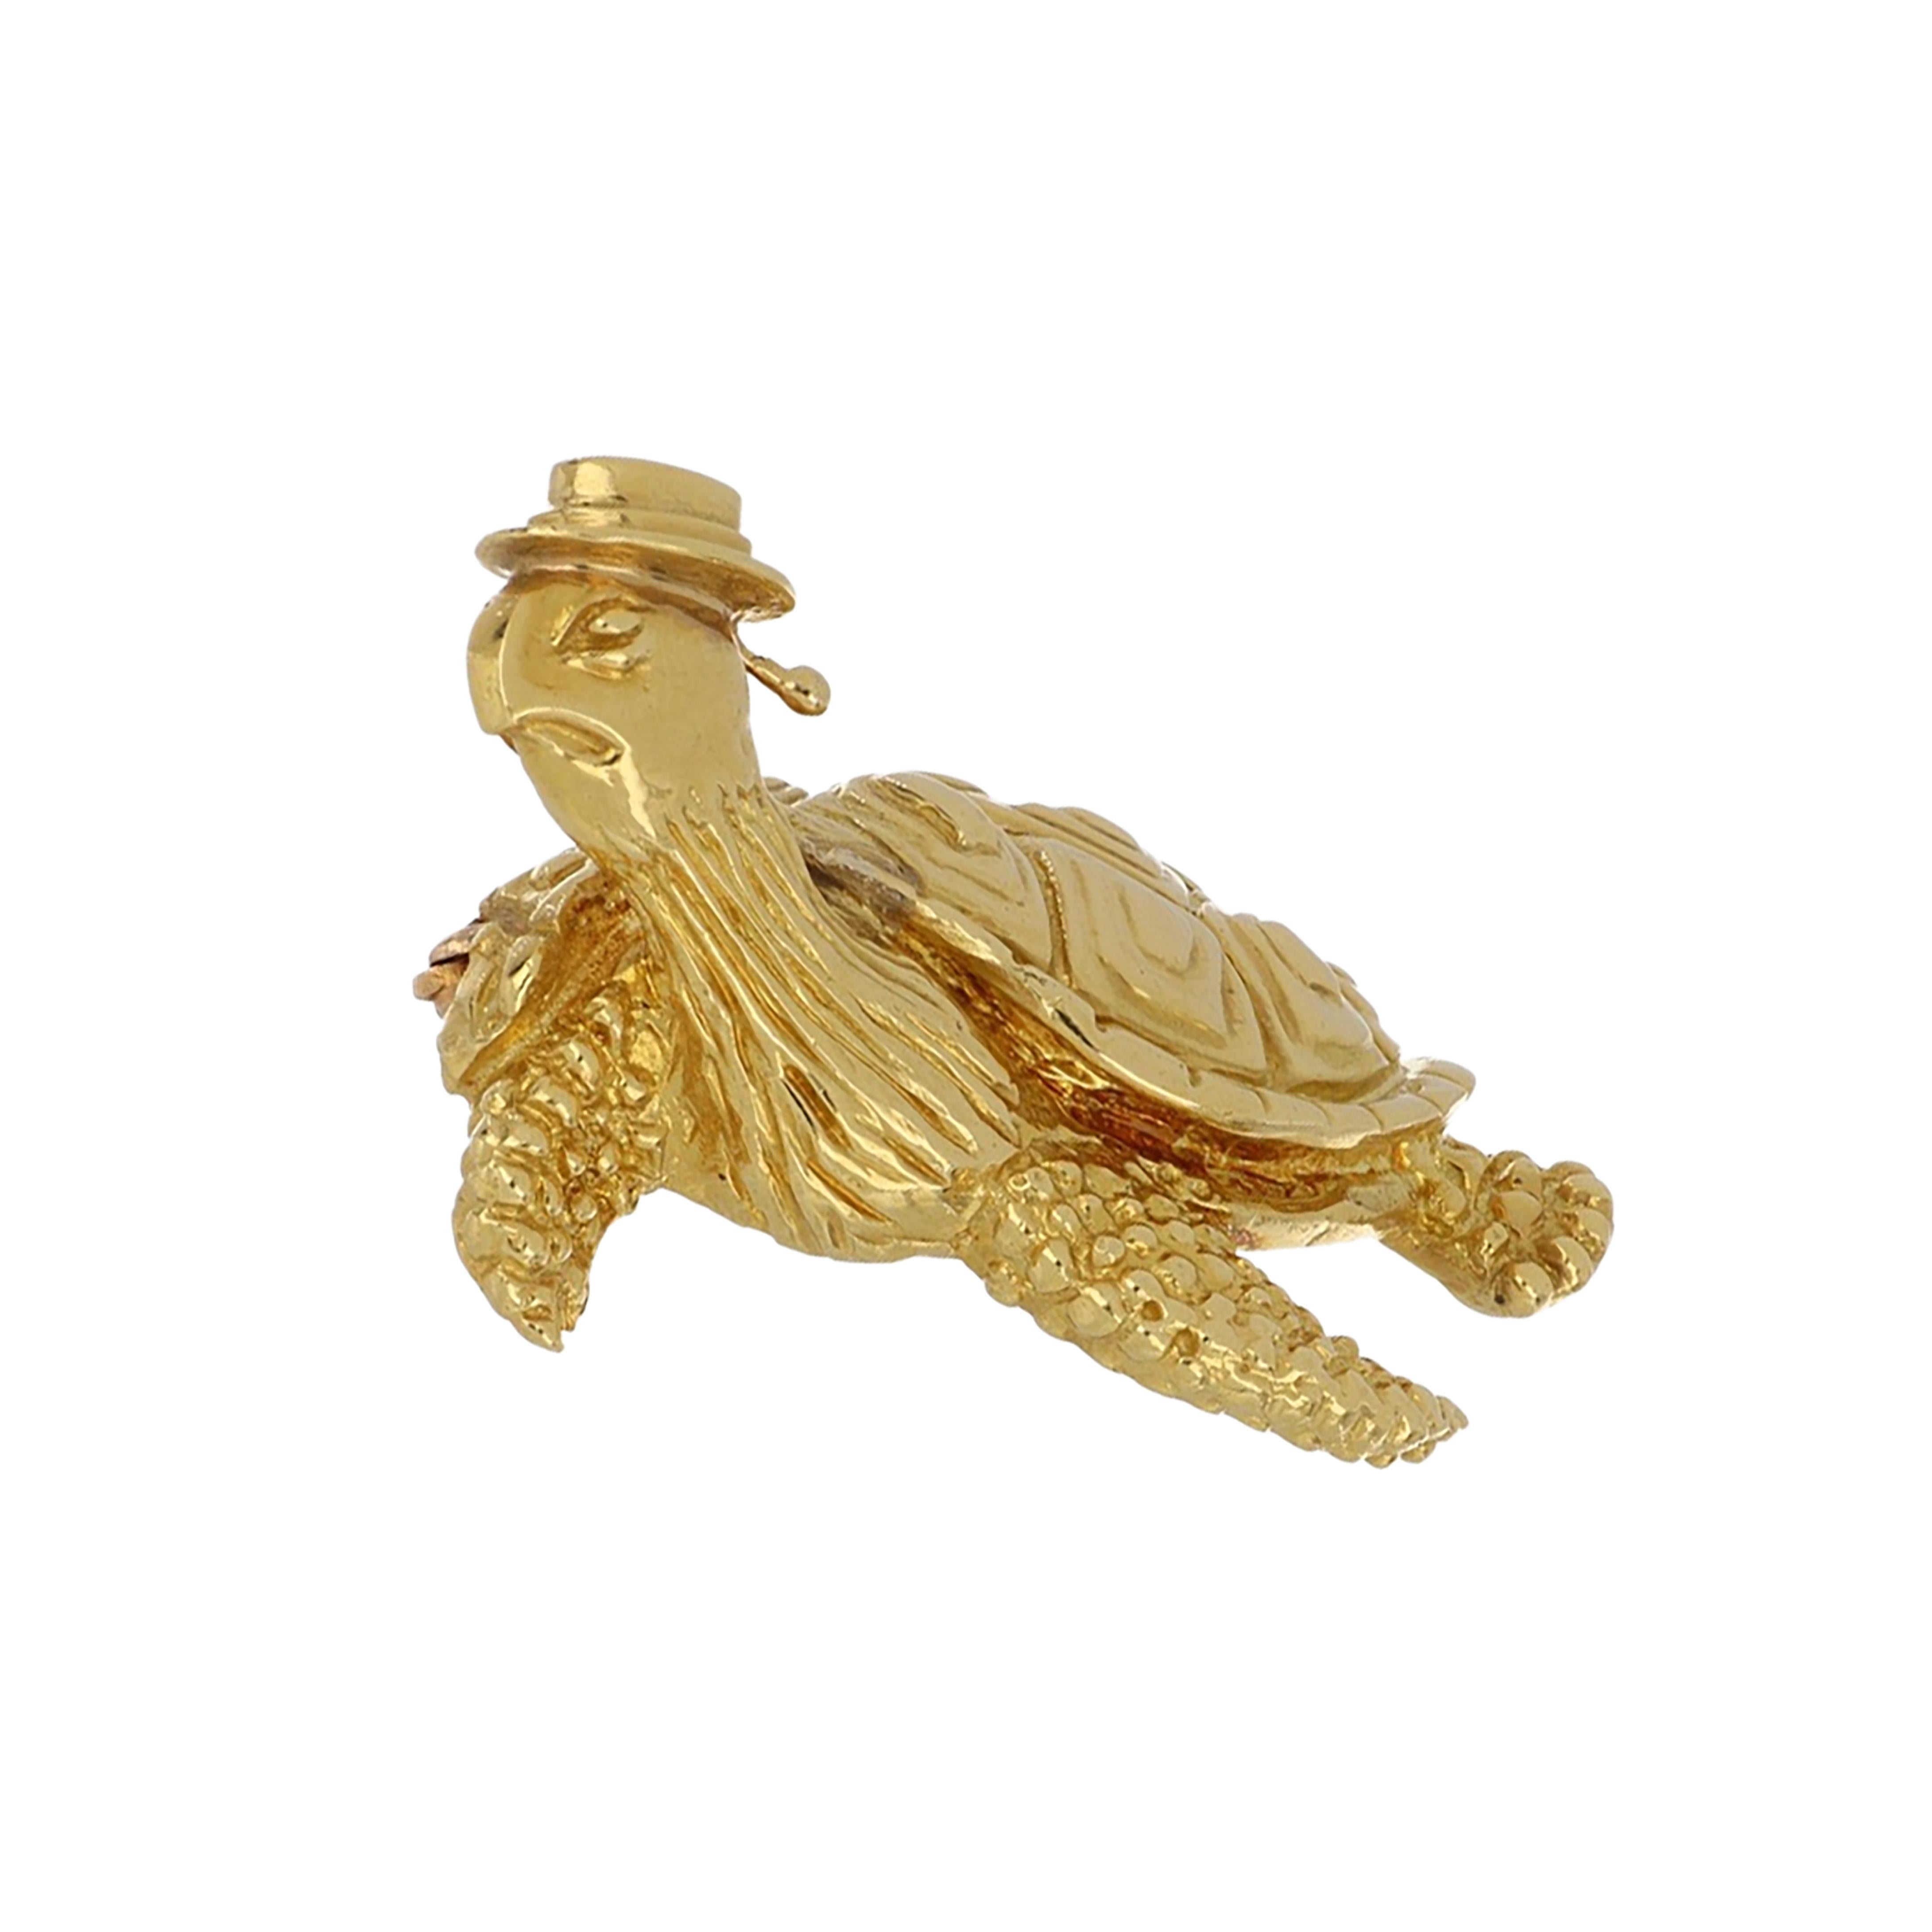 Vintage Tiffany & Co. 18K yellow gold sea turtle pin with a hat and textured gold detail. 